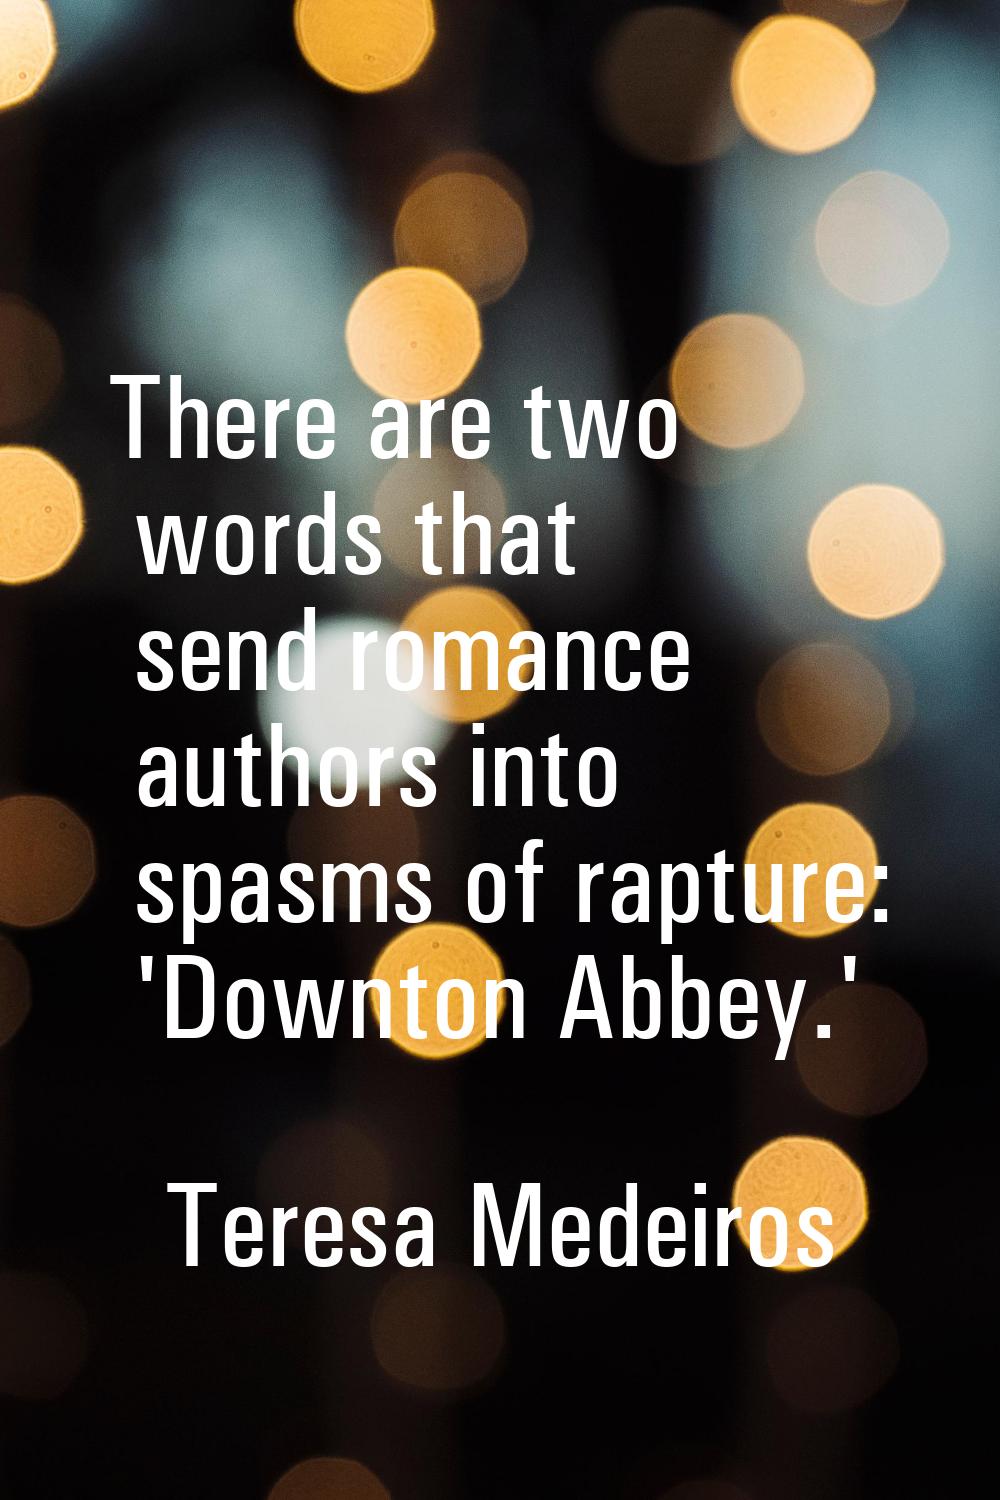 There are two words that send romance authors into spasms of rapture: 'Downton Abbey.'